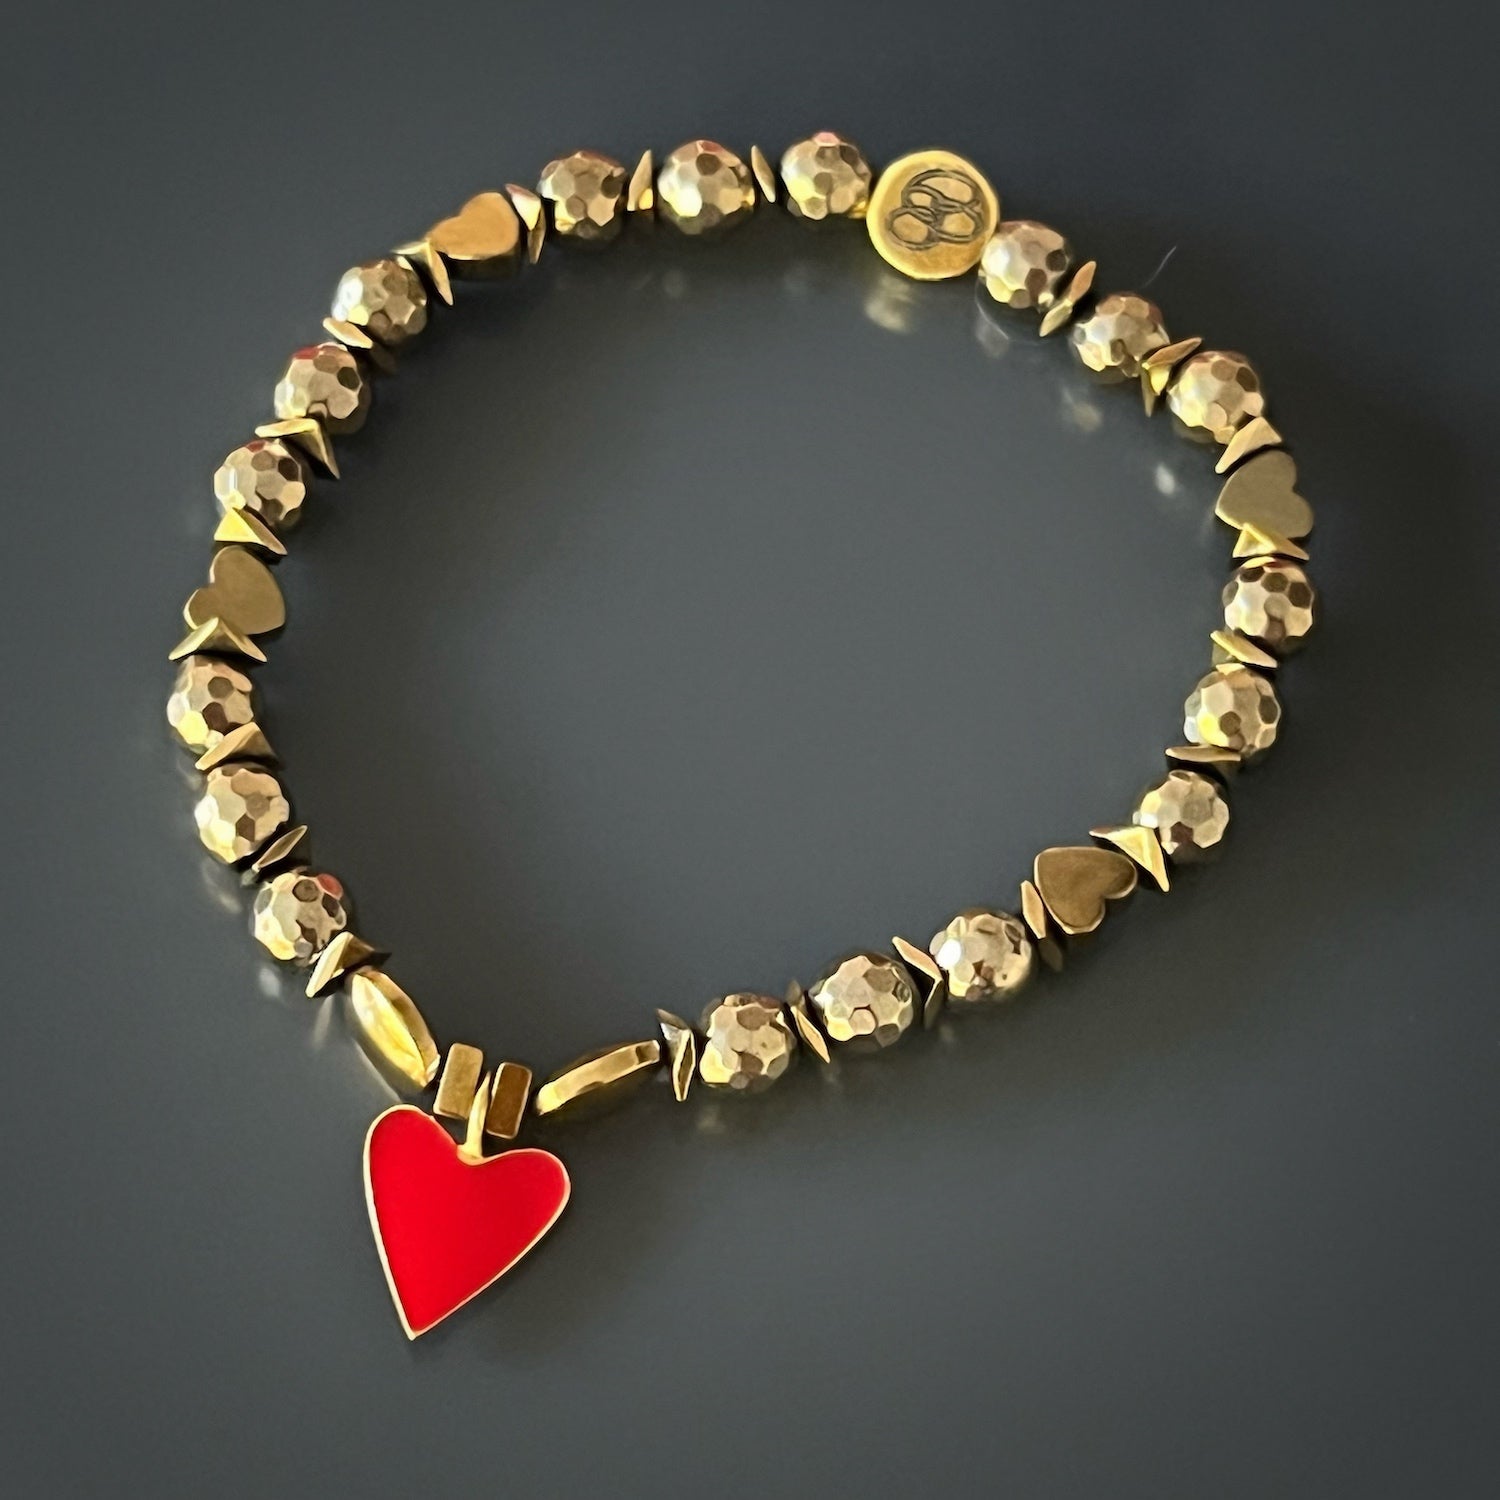 Wear the Red Heart Love Bracelet as a symbol of love and devotion, with its heart-shaped beads and charming gold-plated accents.